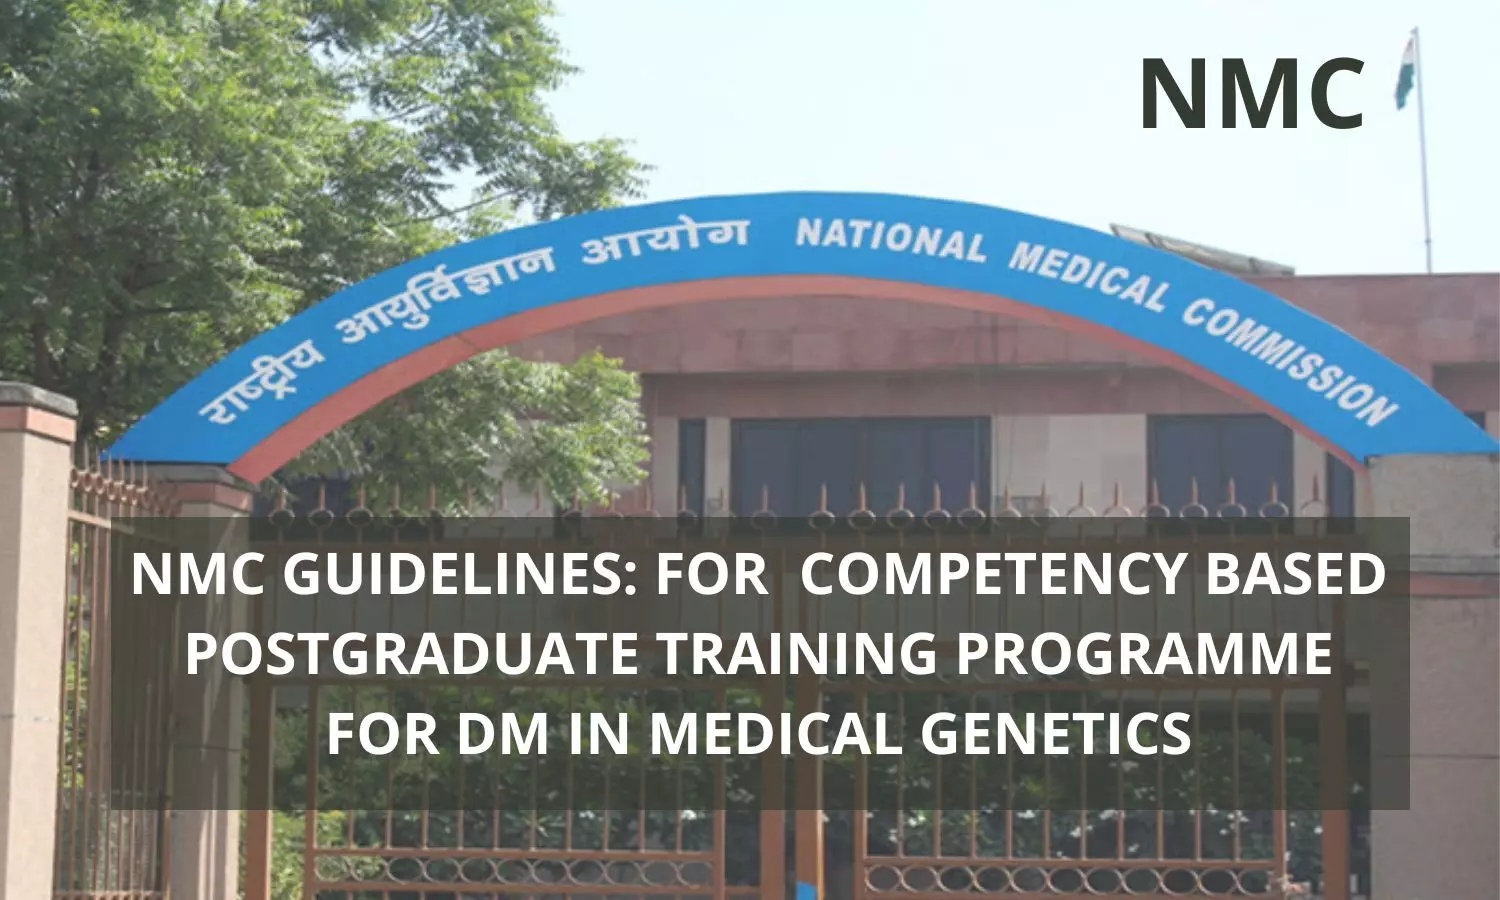 NMC Guidelines For Competency-Based Training Programme For DM Medical Genetics